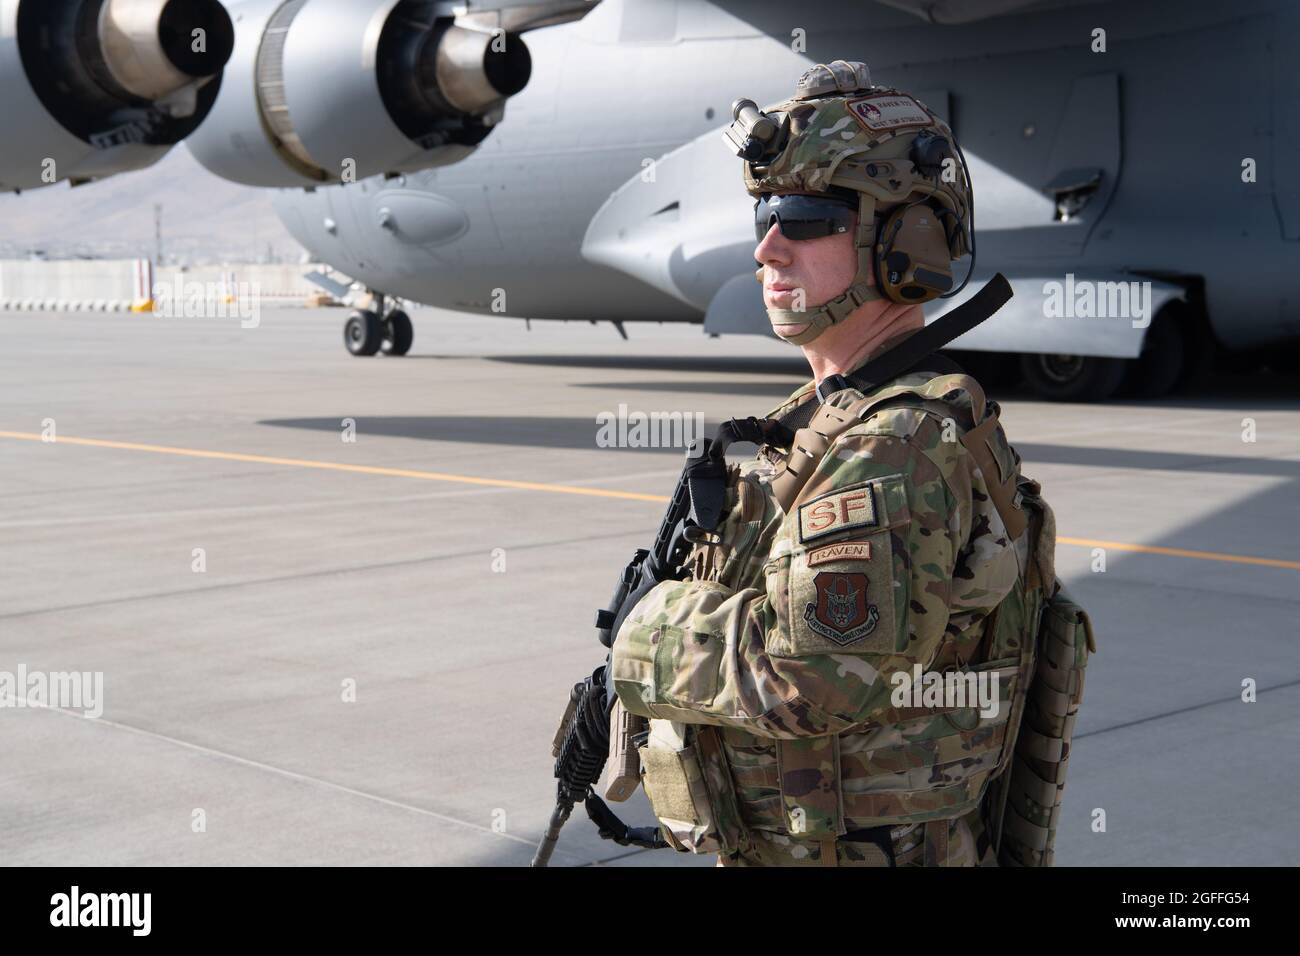 Kabul, Afghanistan. 24th Aug, 2021. A U.S. Air Force airman with security forces raven, 816th Expeditionary Airlift Squadron, maintains a security cordon around a U.S. Air Force C-17 Globemaster III aircraft during the evacuation of Afghan refugees during Operation Allies Refuge August 24, 2021 in Kabul, Afghanistan. Credit: Planetpix/Alamy Live News Stock Photo